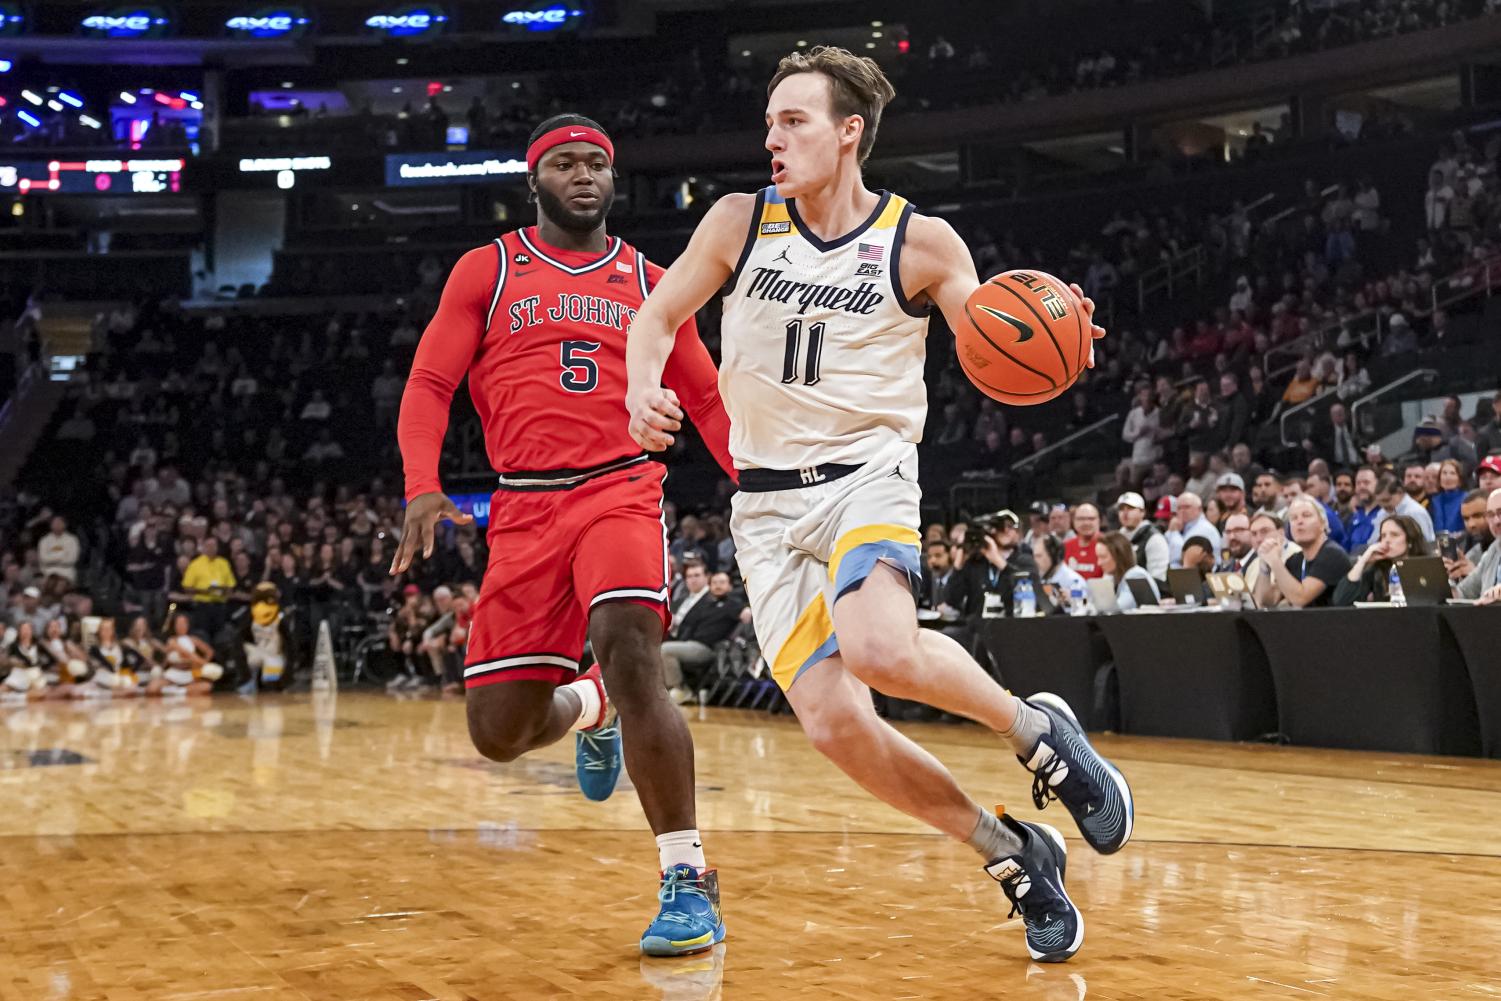 Marquette will miss what Anderson could have been